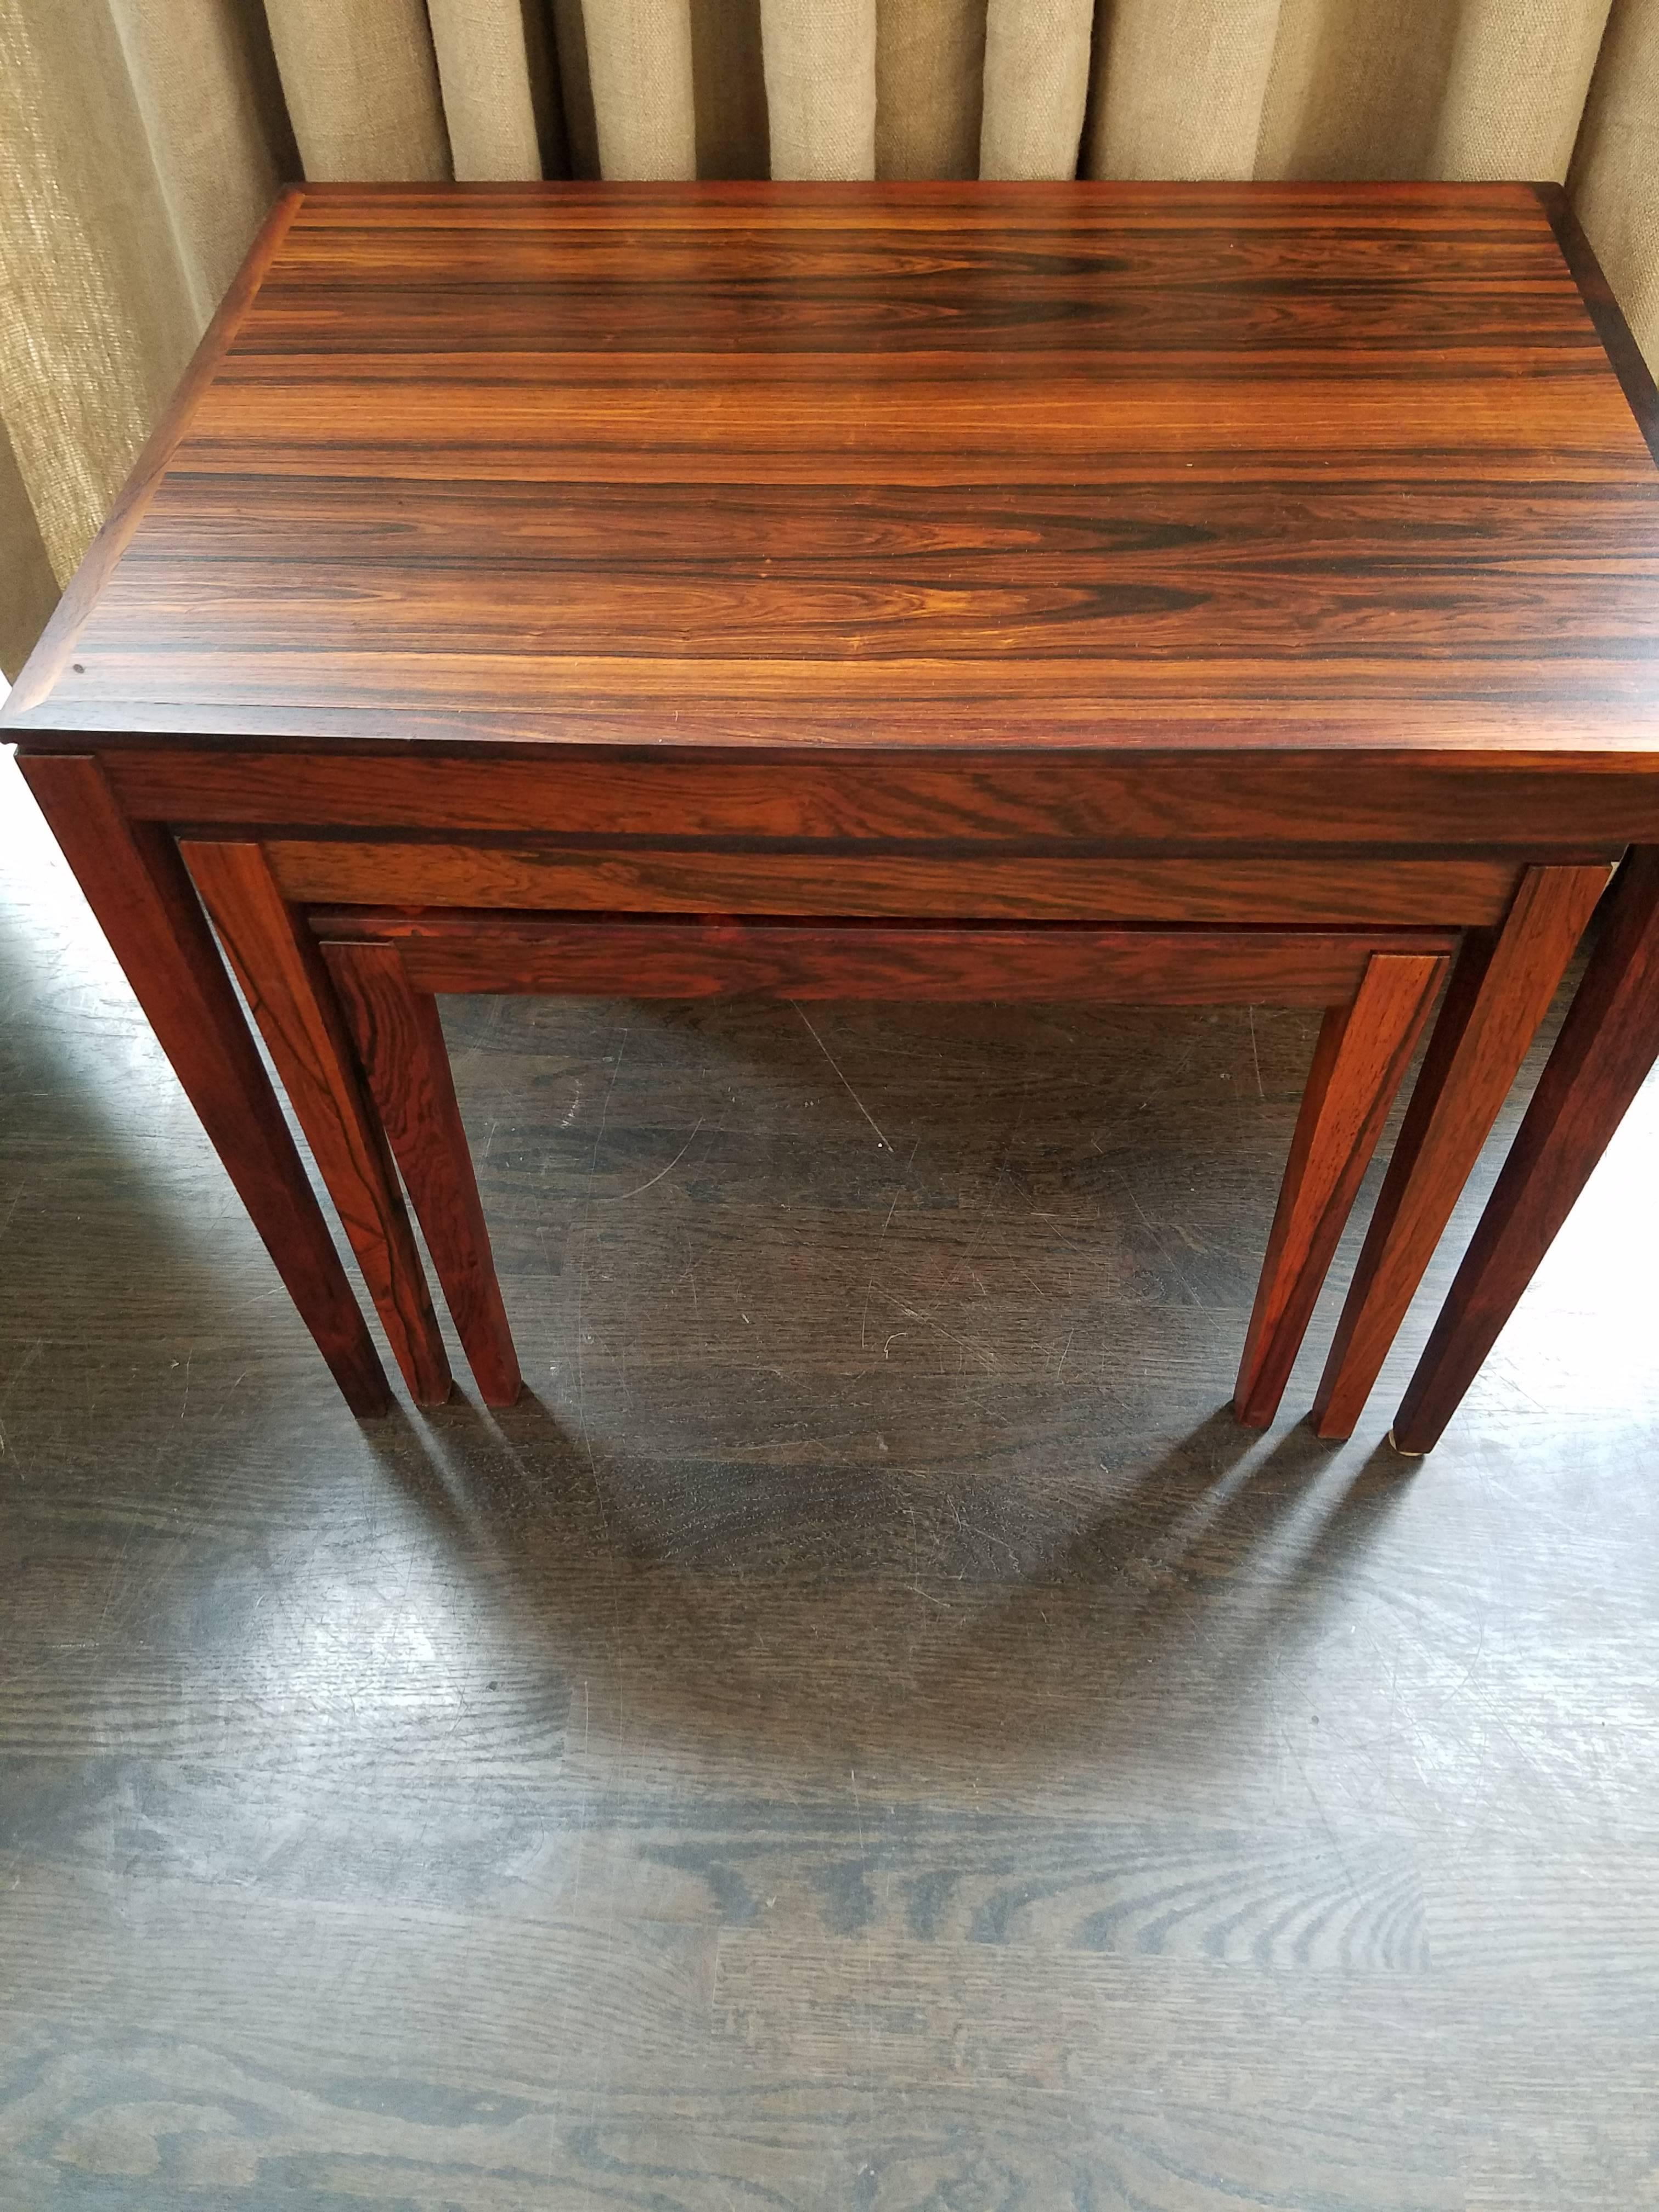 Original Bent Silberg Mobler 1970s Danish set of three nesting tables. These rosewood tables feature tapered legs with reveal around tops. All three tables are in excellent condition.

Measurements: 23.5